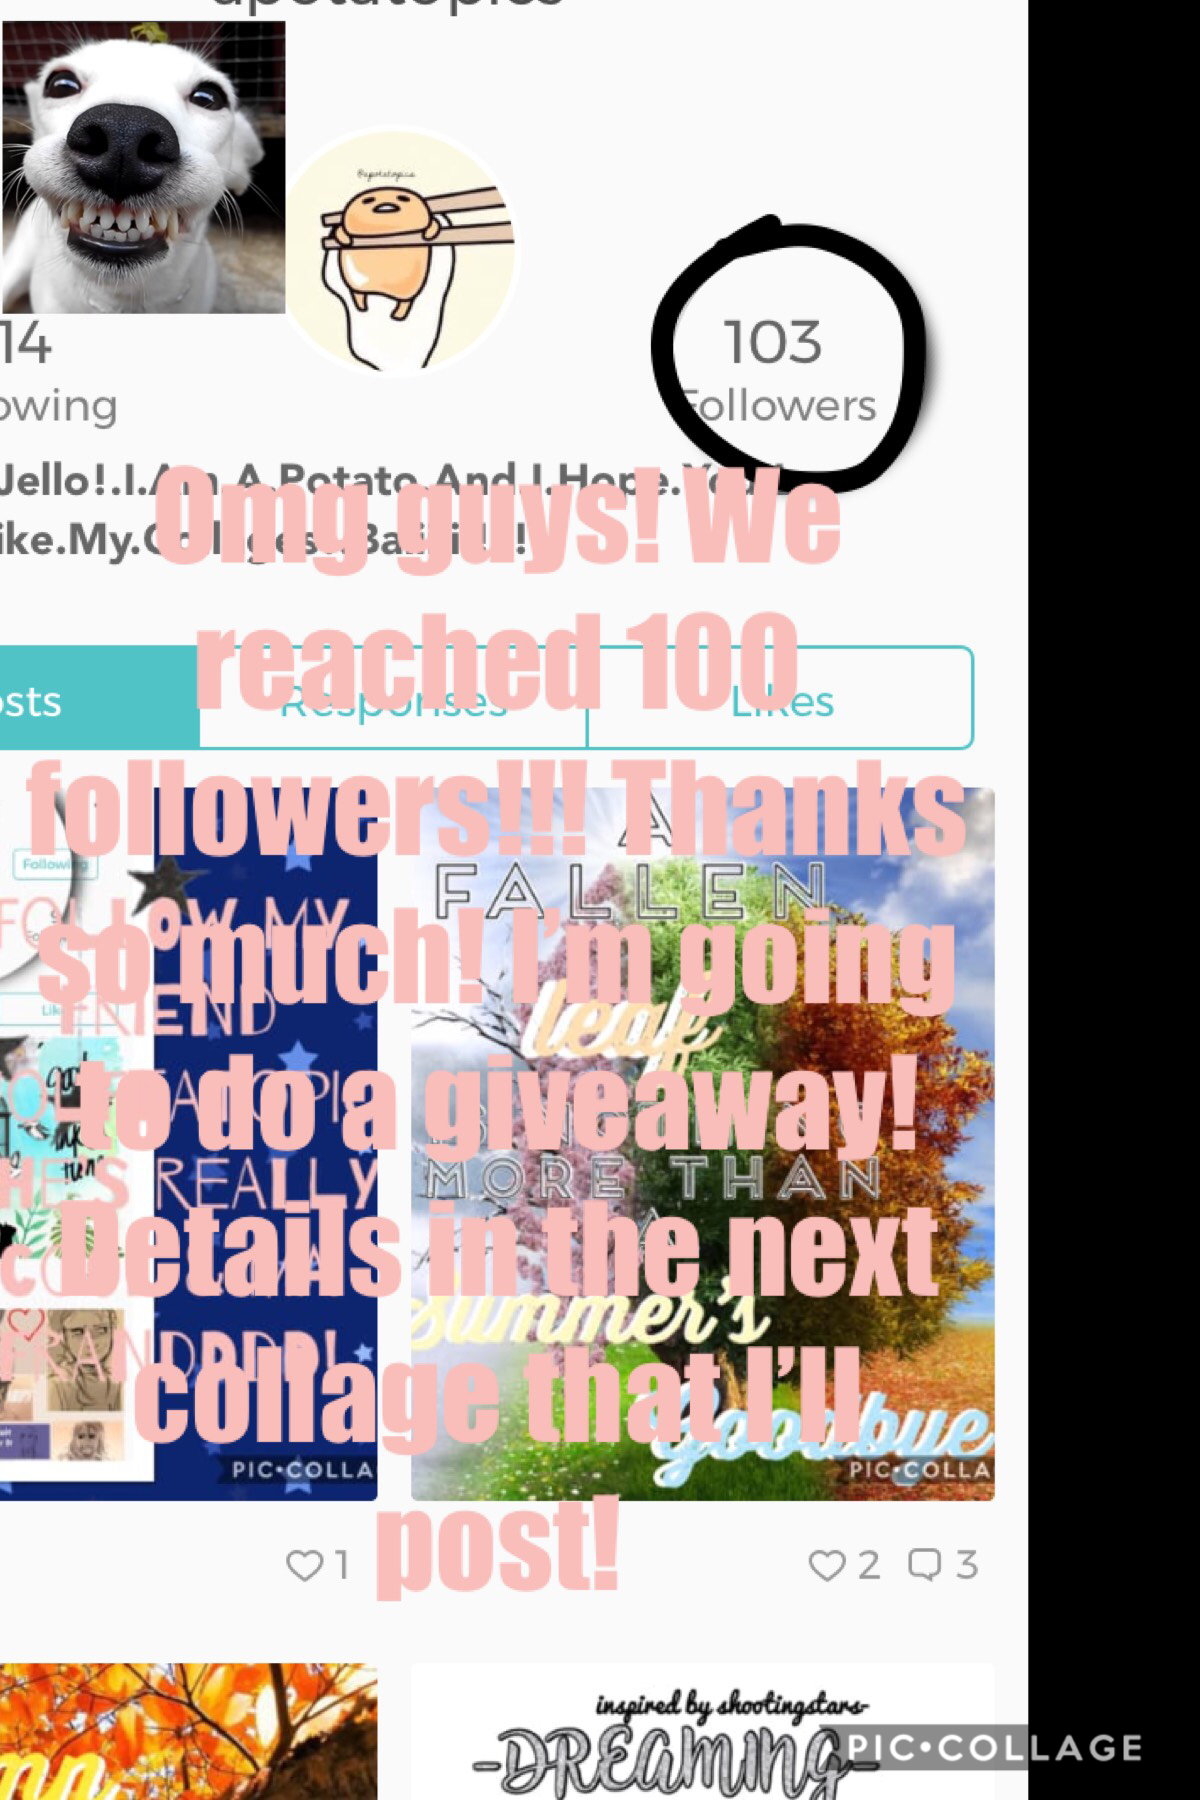 TAP
THANK YOU GUYS!! Ik 100 May not be a lot to you but it’s a milestone!! Anyway, I’ll be doing a giveaway and I’ll need at least 10 entries! More details in the next collage! Baii